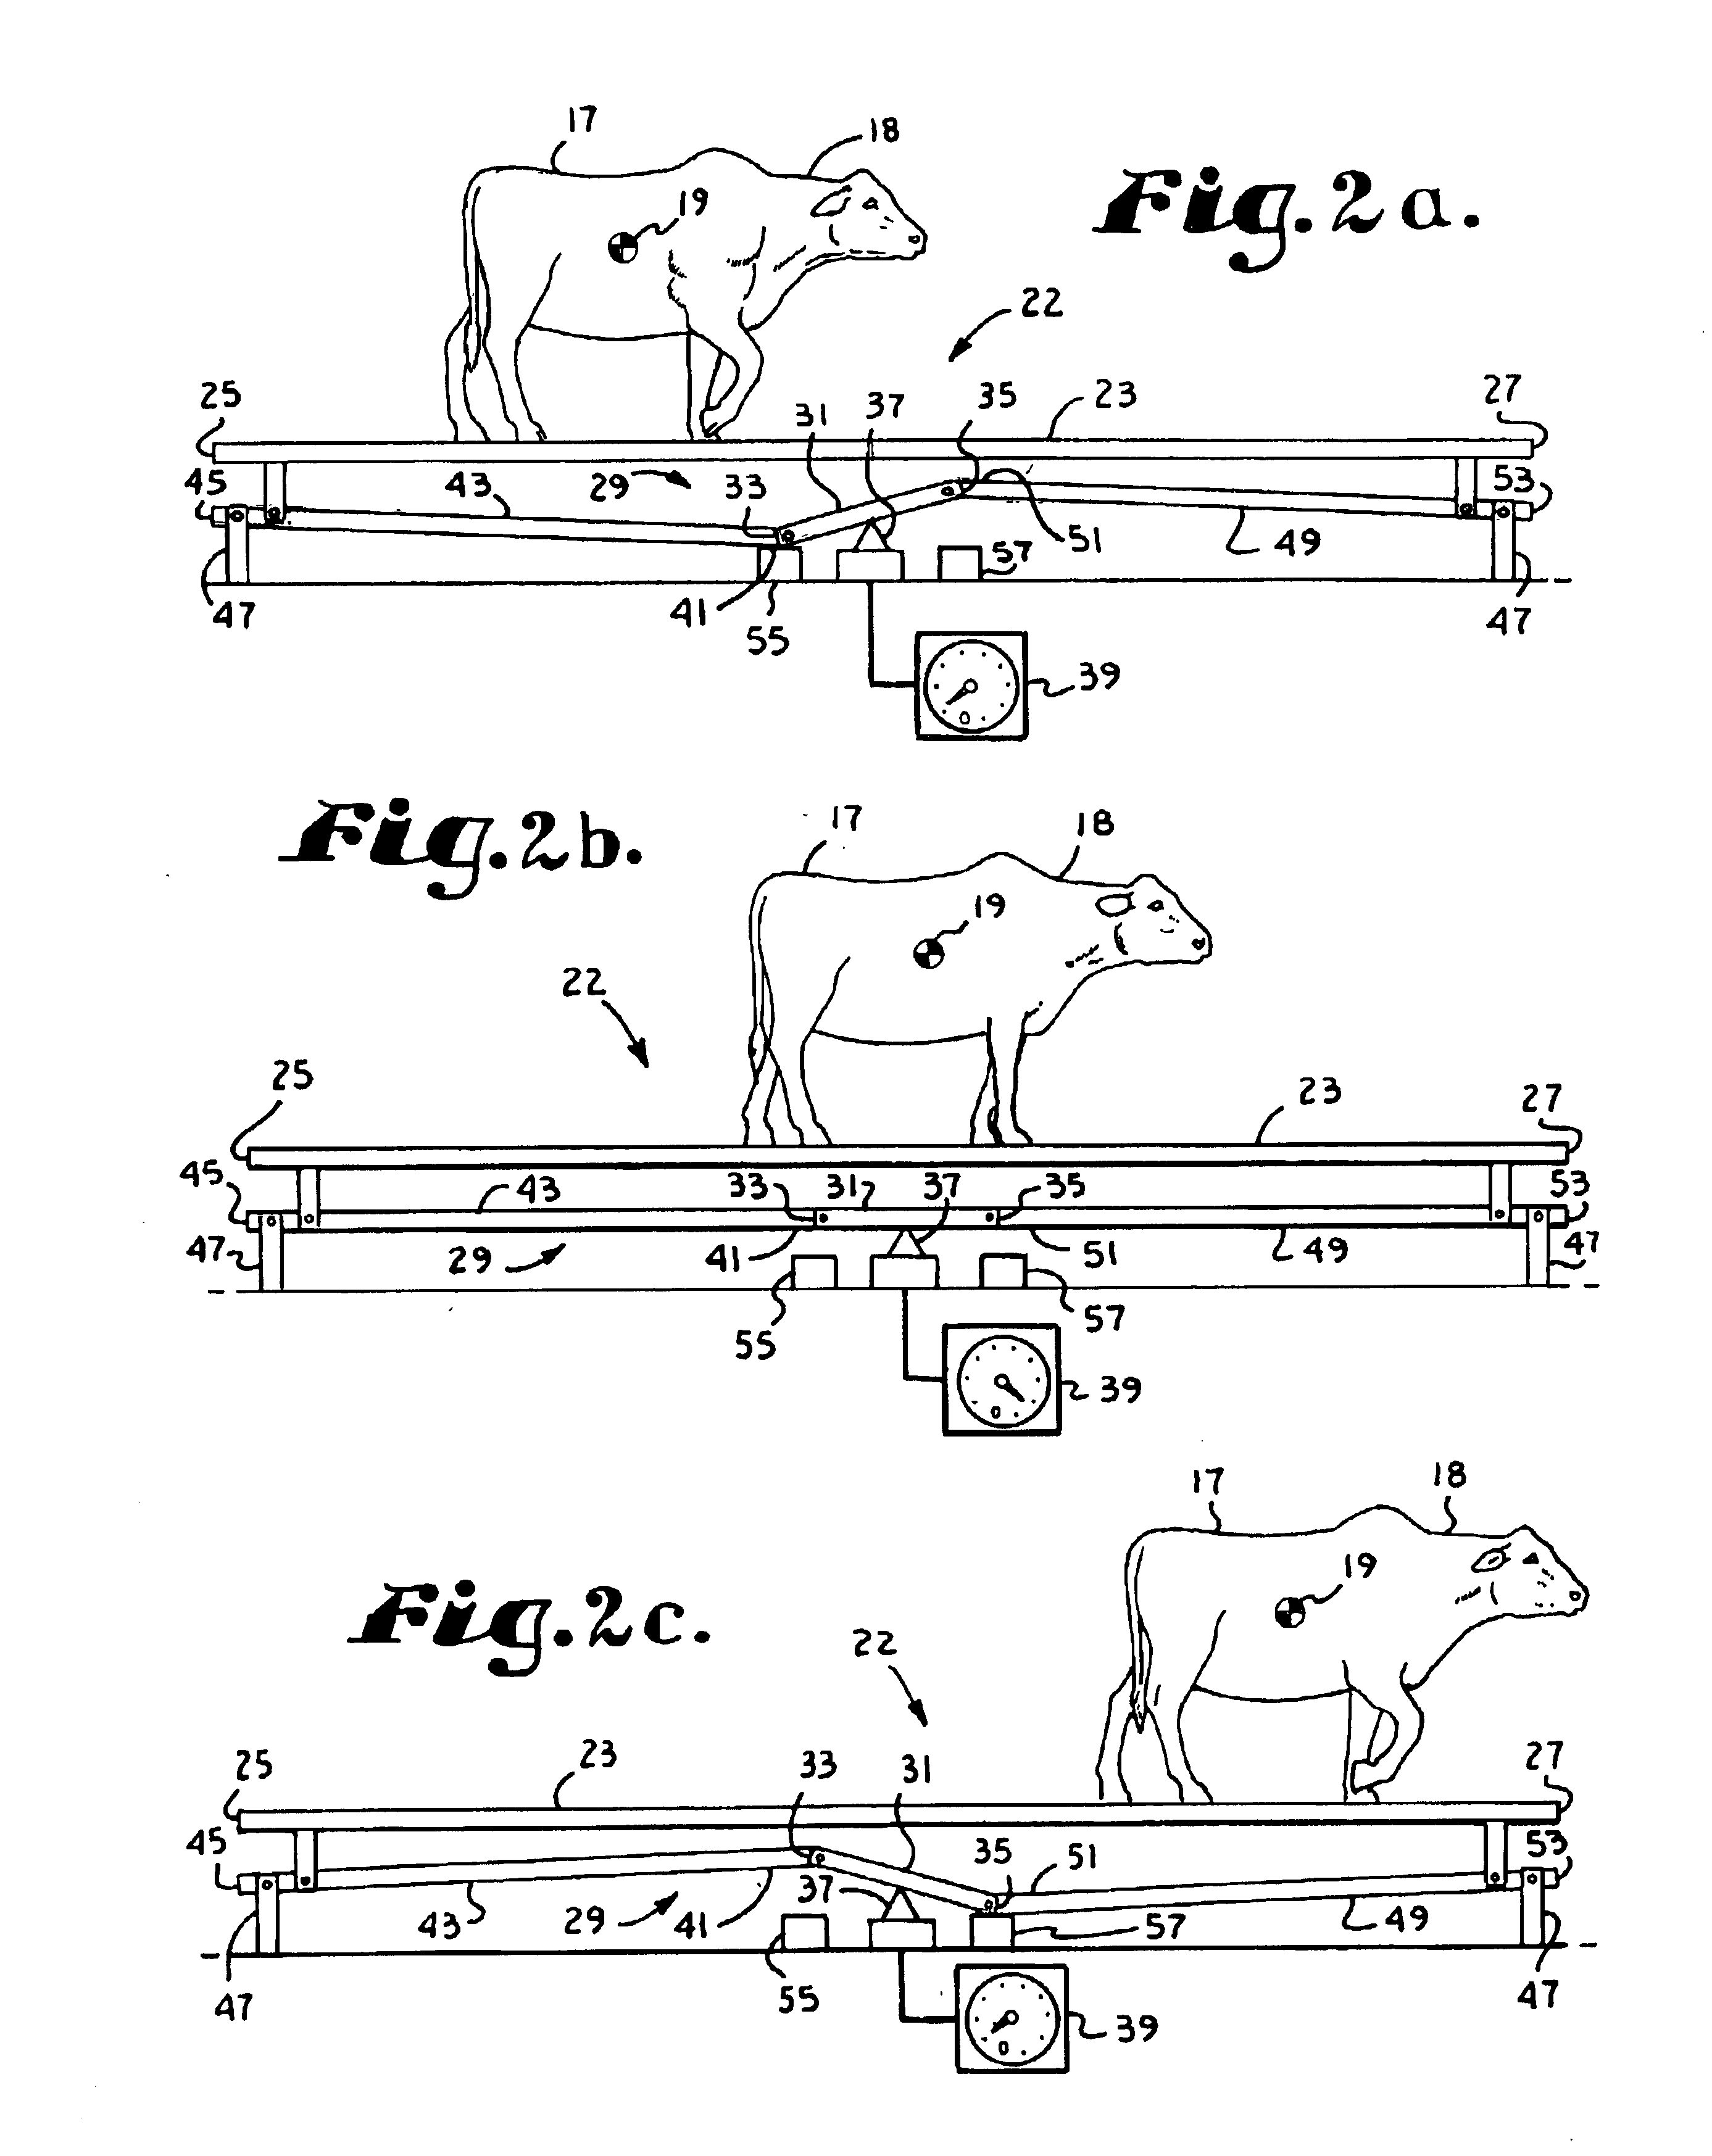 Tipping balance scale for weighing moving objects